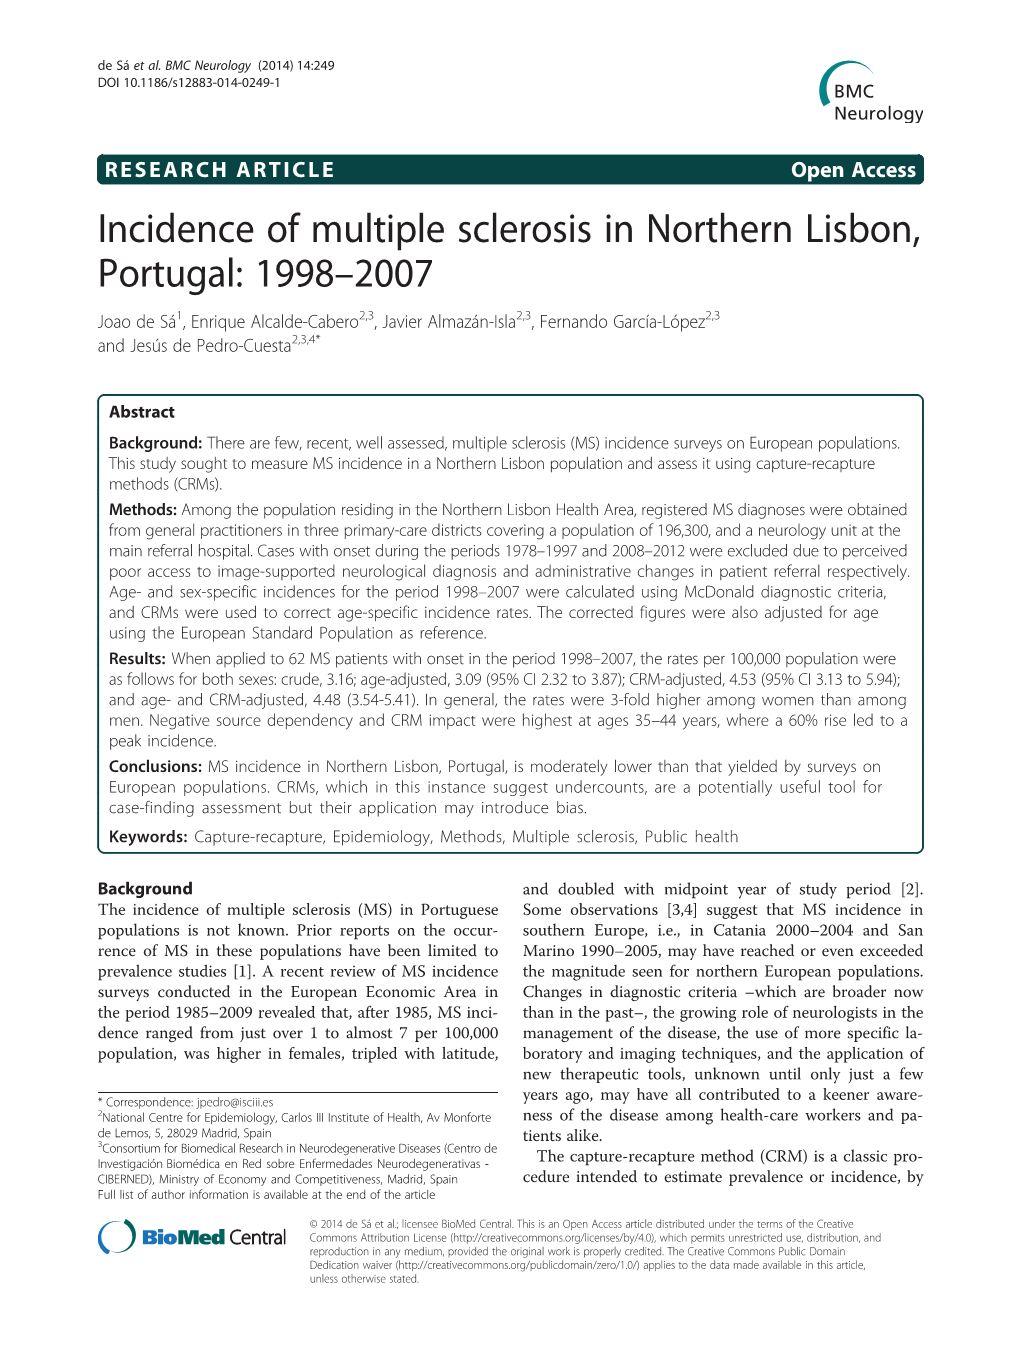 Incidence of Multiple Sclerosis in Northern Lisbon, Portugal: 1998-2007